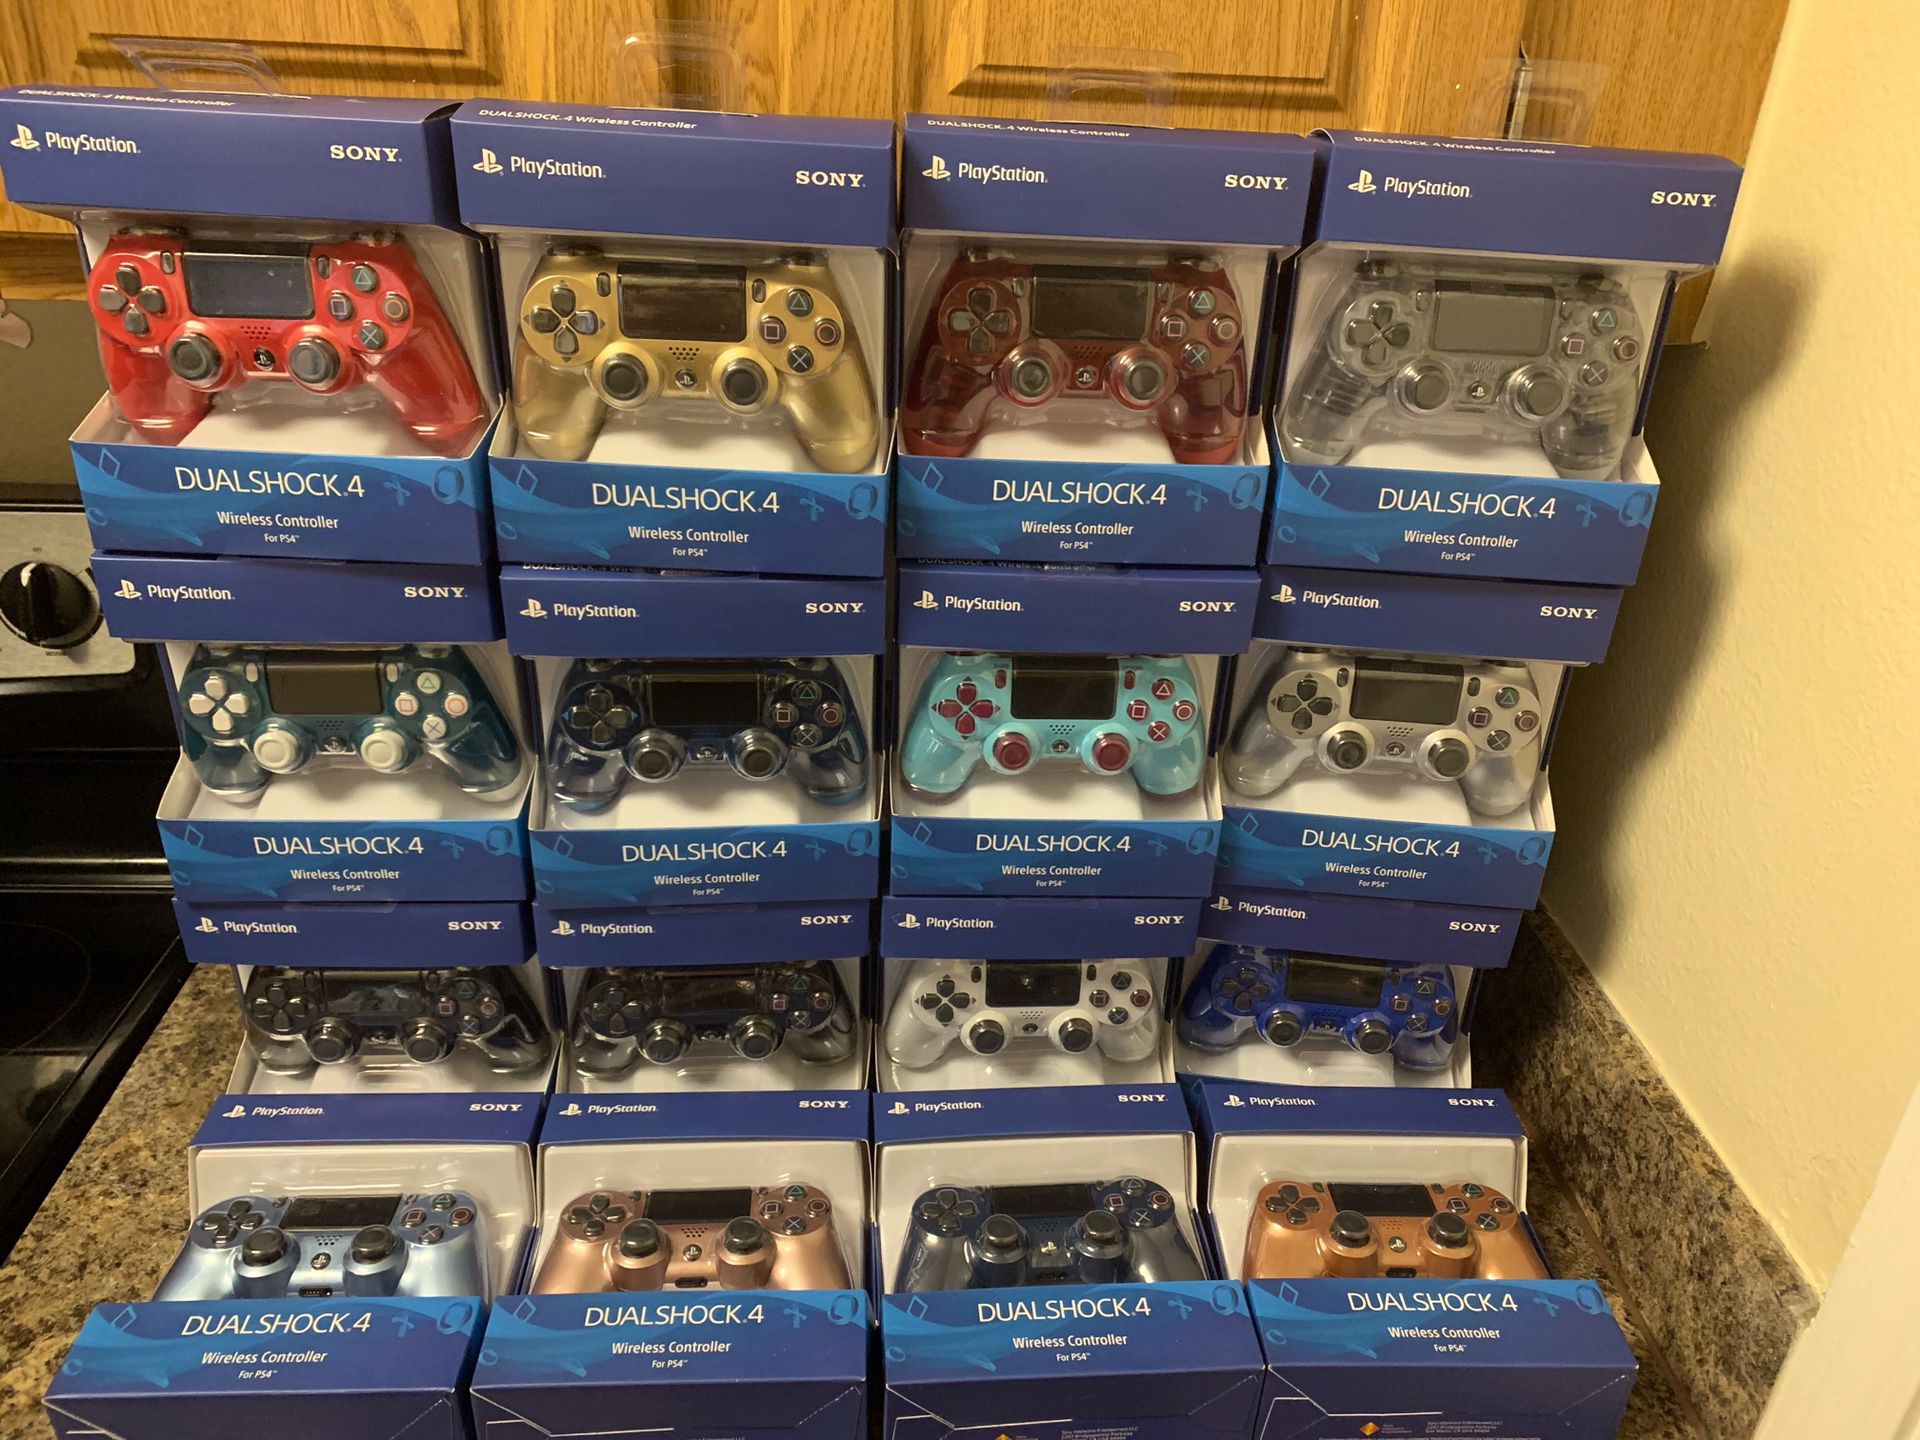 PS4 dual shock controllers